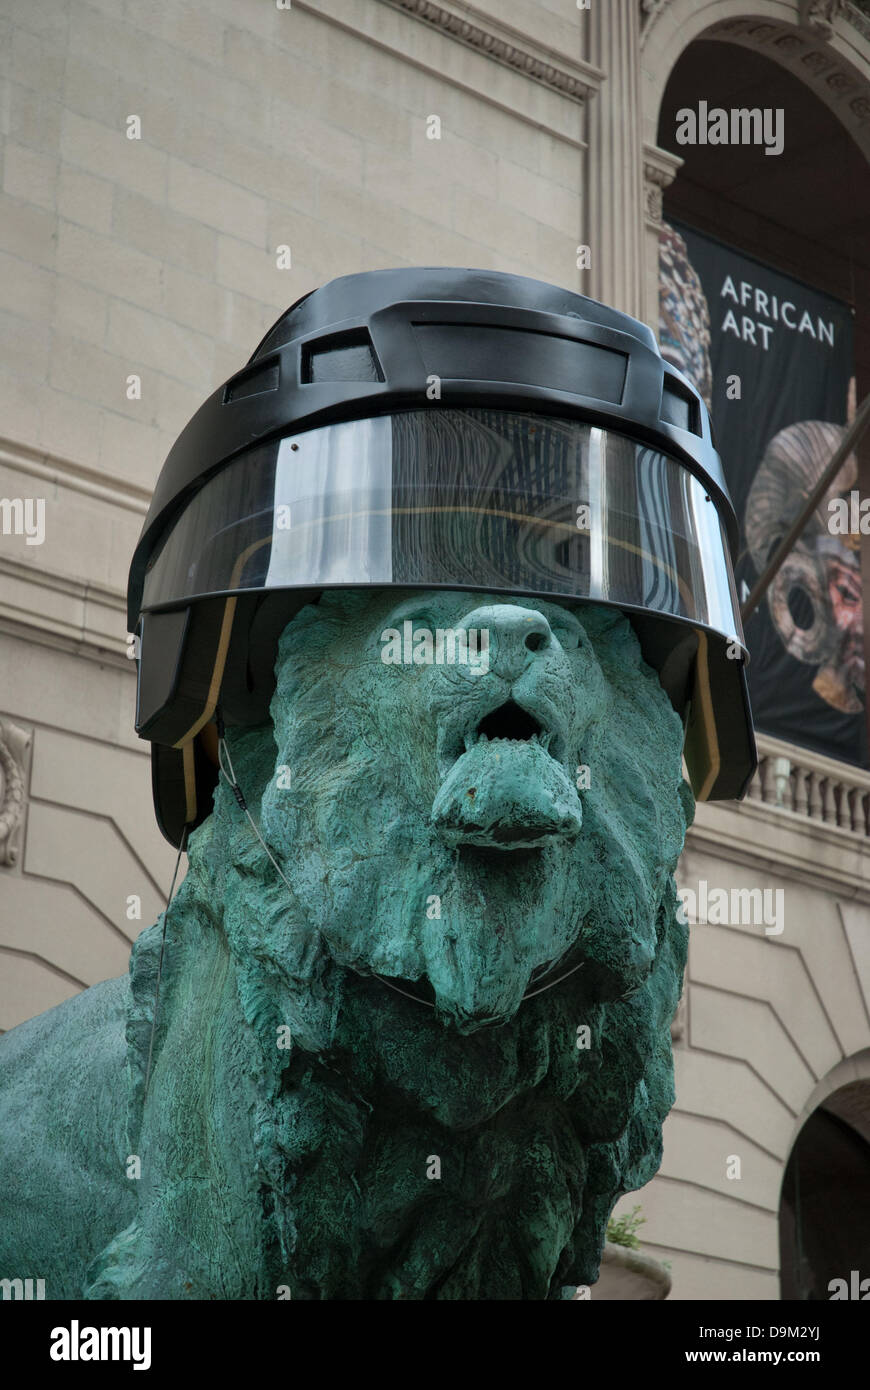 Chicago, Illinois, USA. 17th June, 2013. Art Institute of Chicago Lions wear Chicago Blackhawks' helmut as a show of support for Chicago's hockey team battling against the Boston Bruins for the Stanley Cup. The bronze statues guarding the entrance to the museum wore Hawks' helmut in 2010 when the Blackhawks brought home the Stanley Cup trophy. On other occasions, the Lions have donned White Sox hats and Chicago Bears helmets to honor Chicago's winning teams. ©Karen I. Hirsch/ZUMAPRESS.com/Alamy Live News Stock Photo